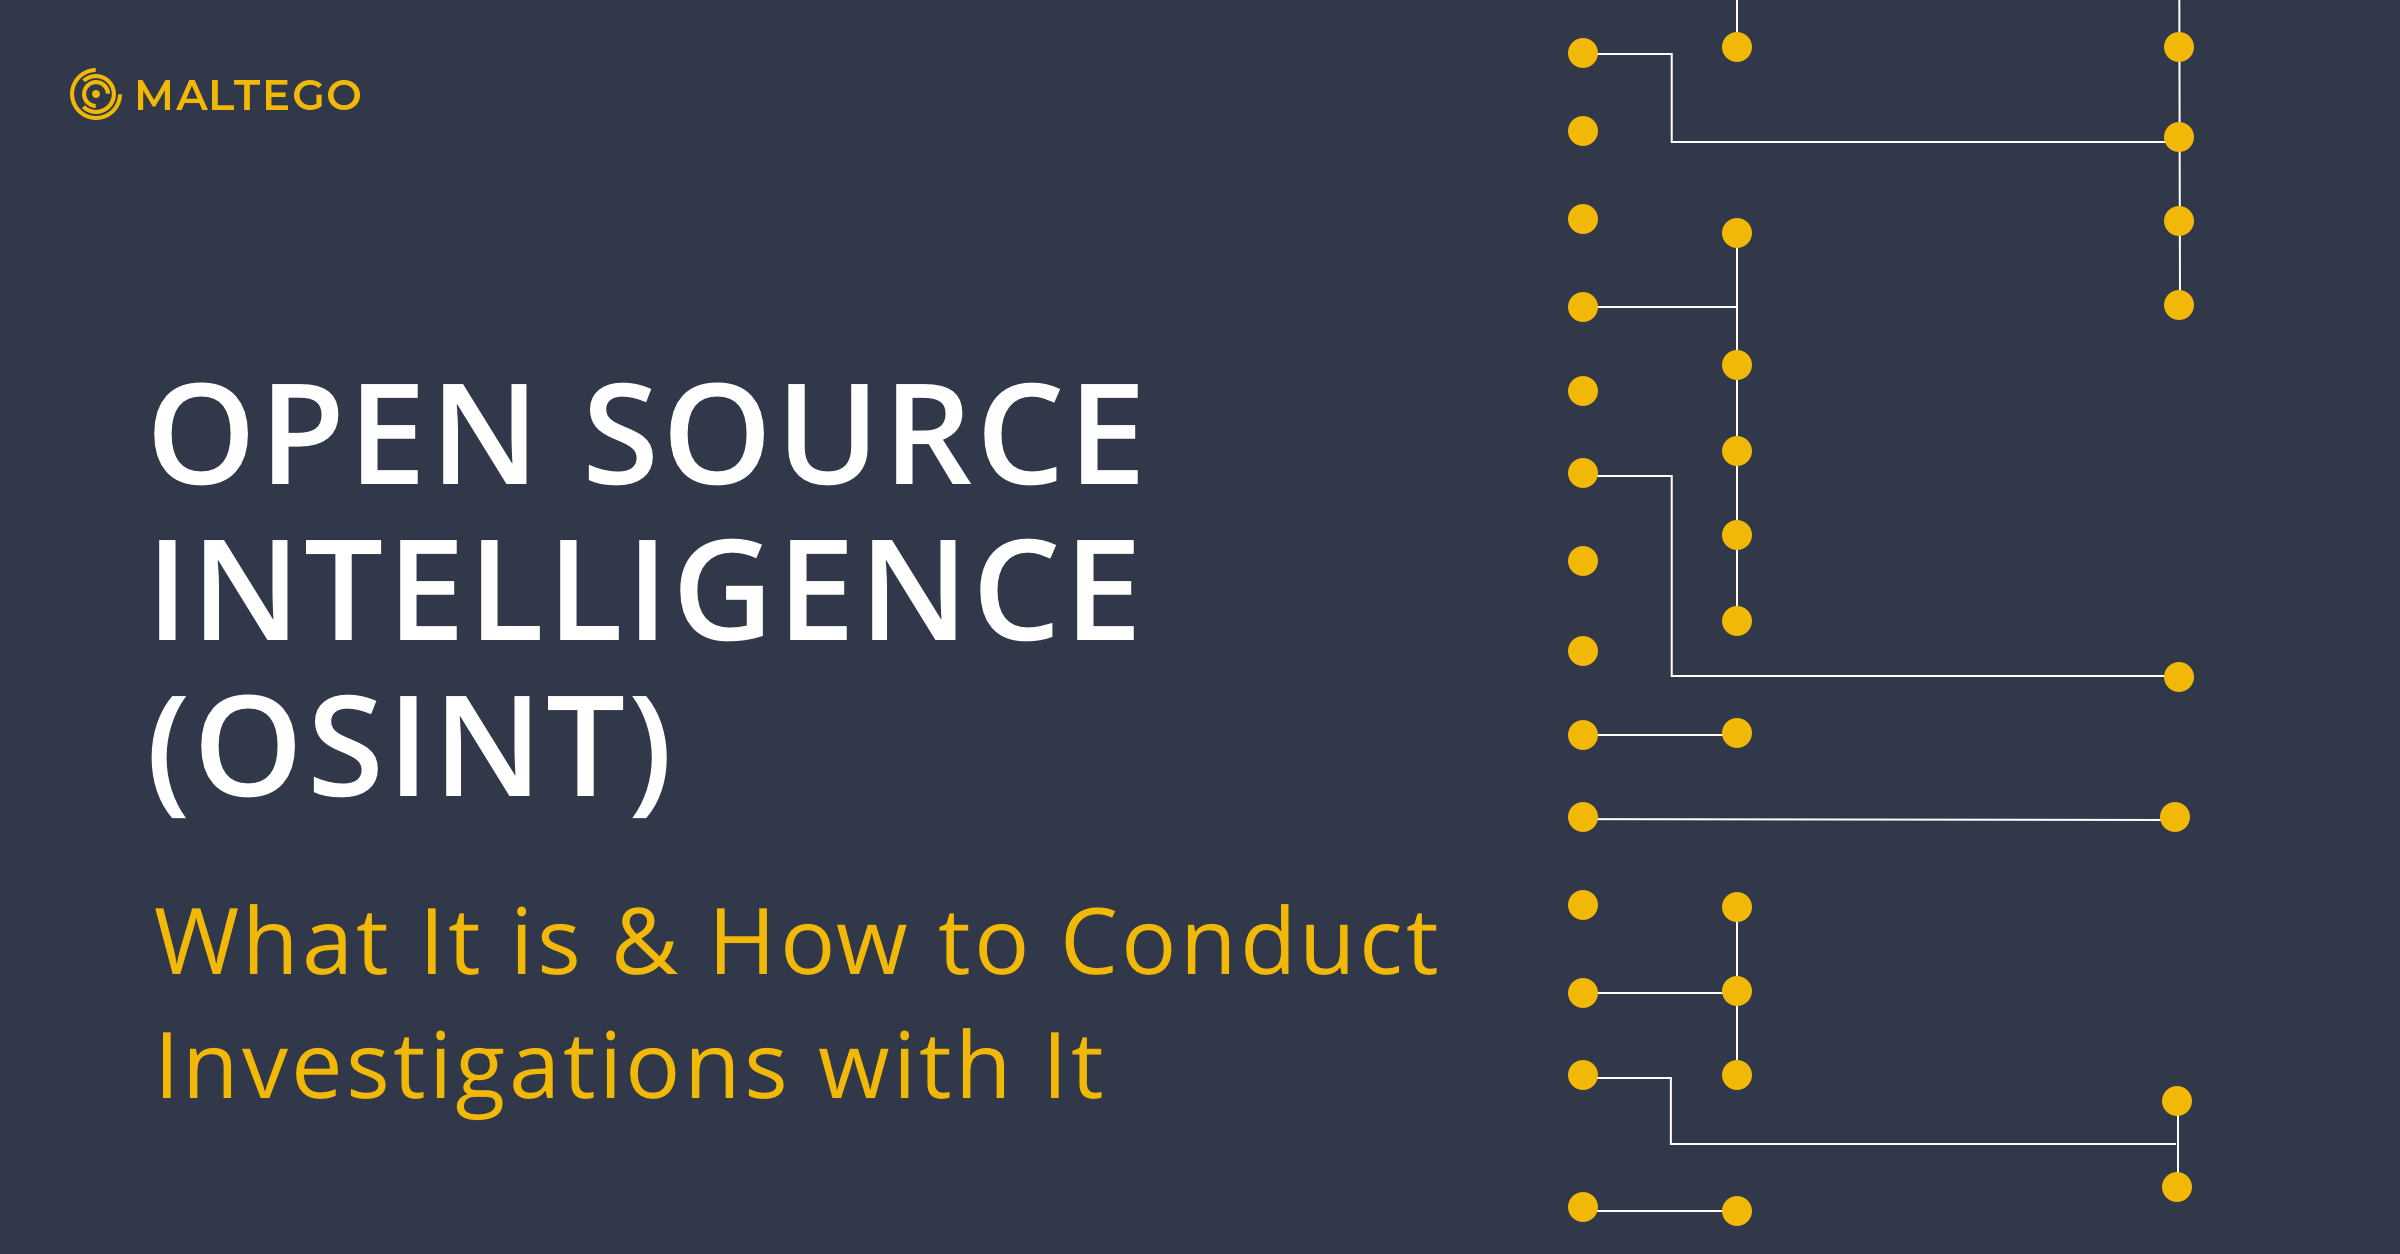 What Is Open Source Intelligence and How to Conduct OSINT